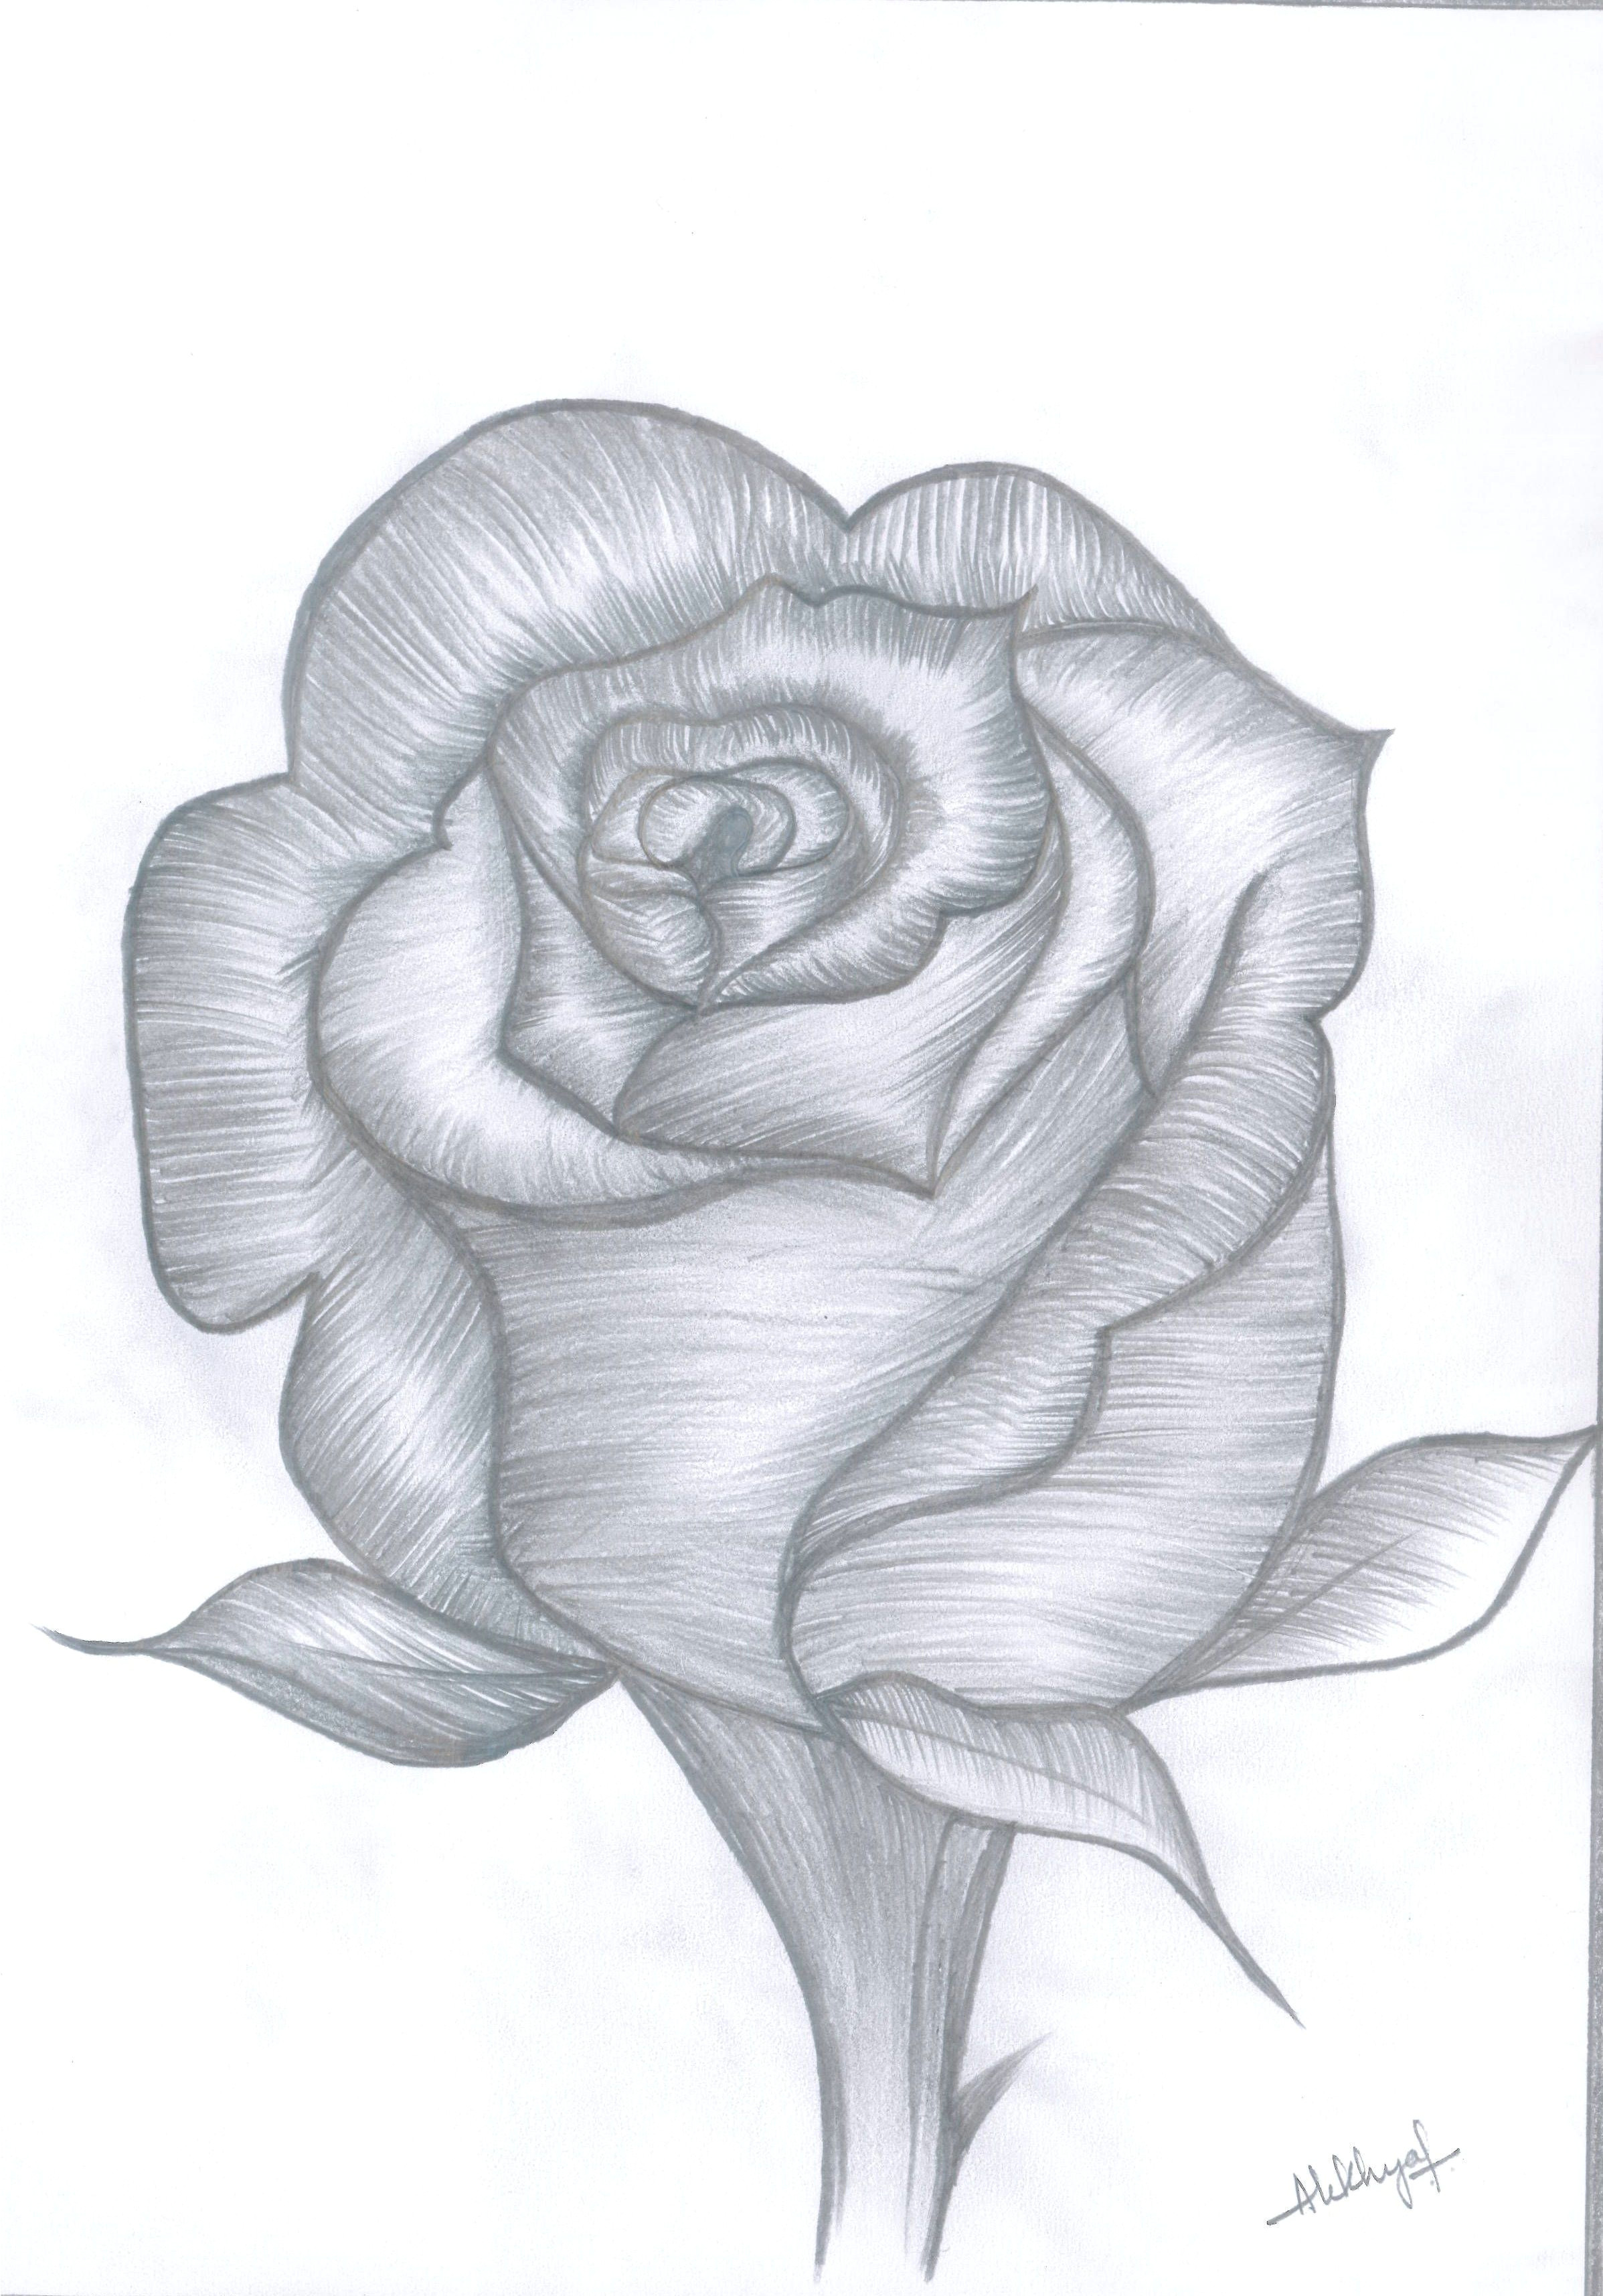 Drawing A Rose Bud Rose Bud Drawings In 2018 Pinterest Draw Rose Buds and Pencil